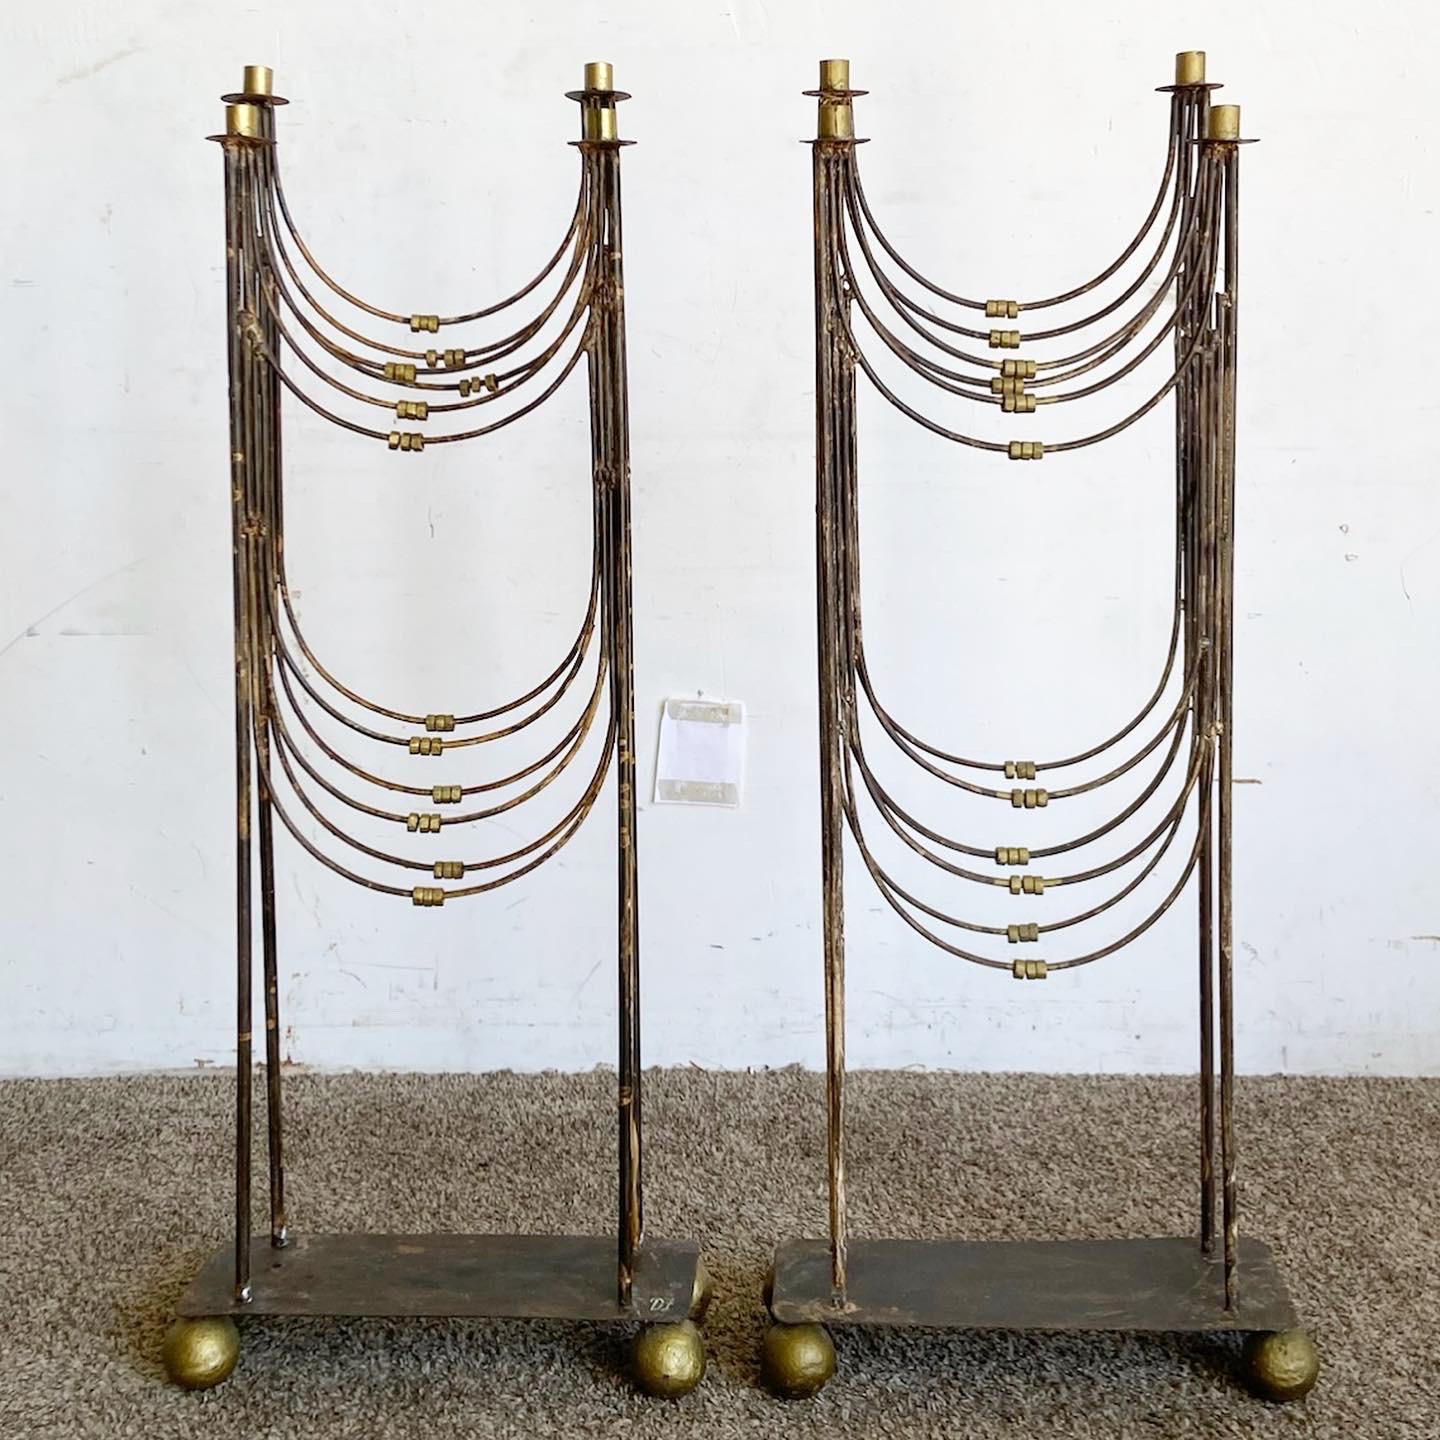 Elevate your space with the Gold and Silver Floor Candelabras. This Regency-style pair combines gold and silver metals, offering a luxurious touch. With four arms each, they are both functional and decorative, perfect for adding timeless opulence to